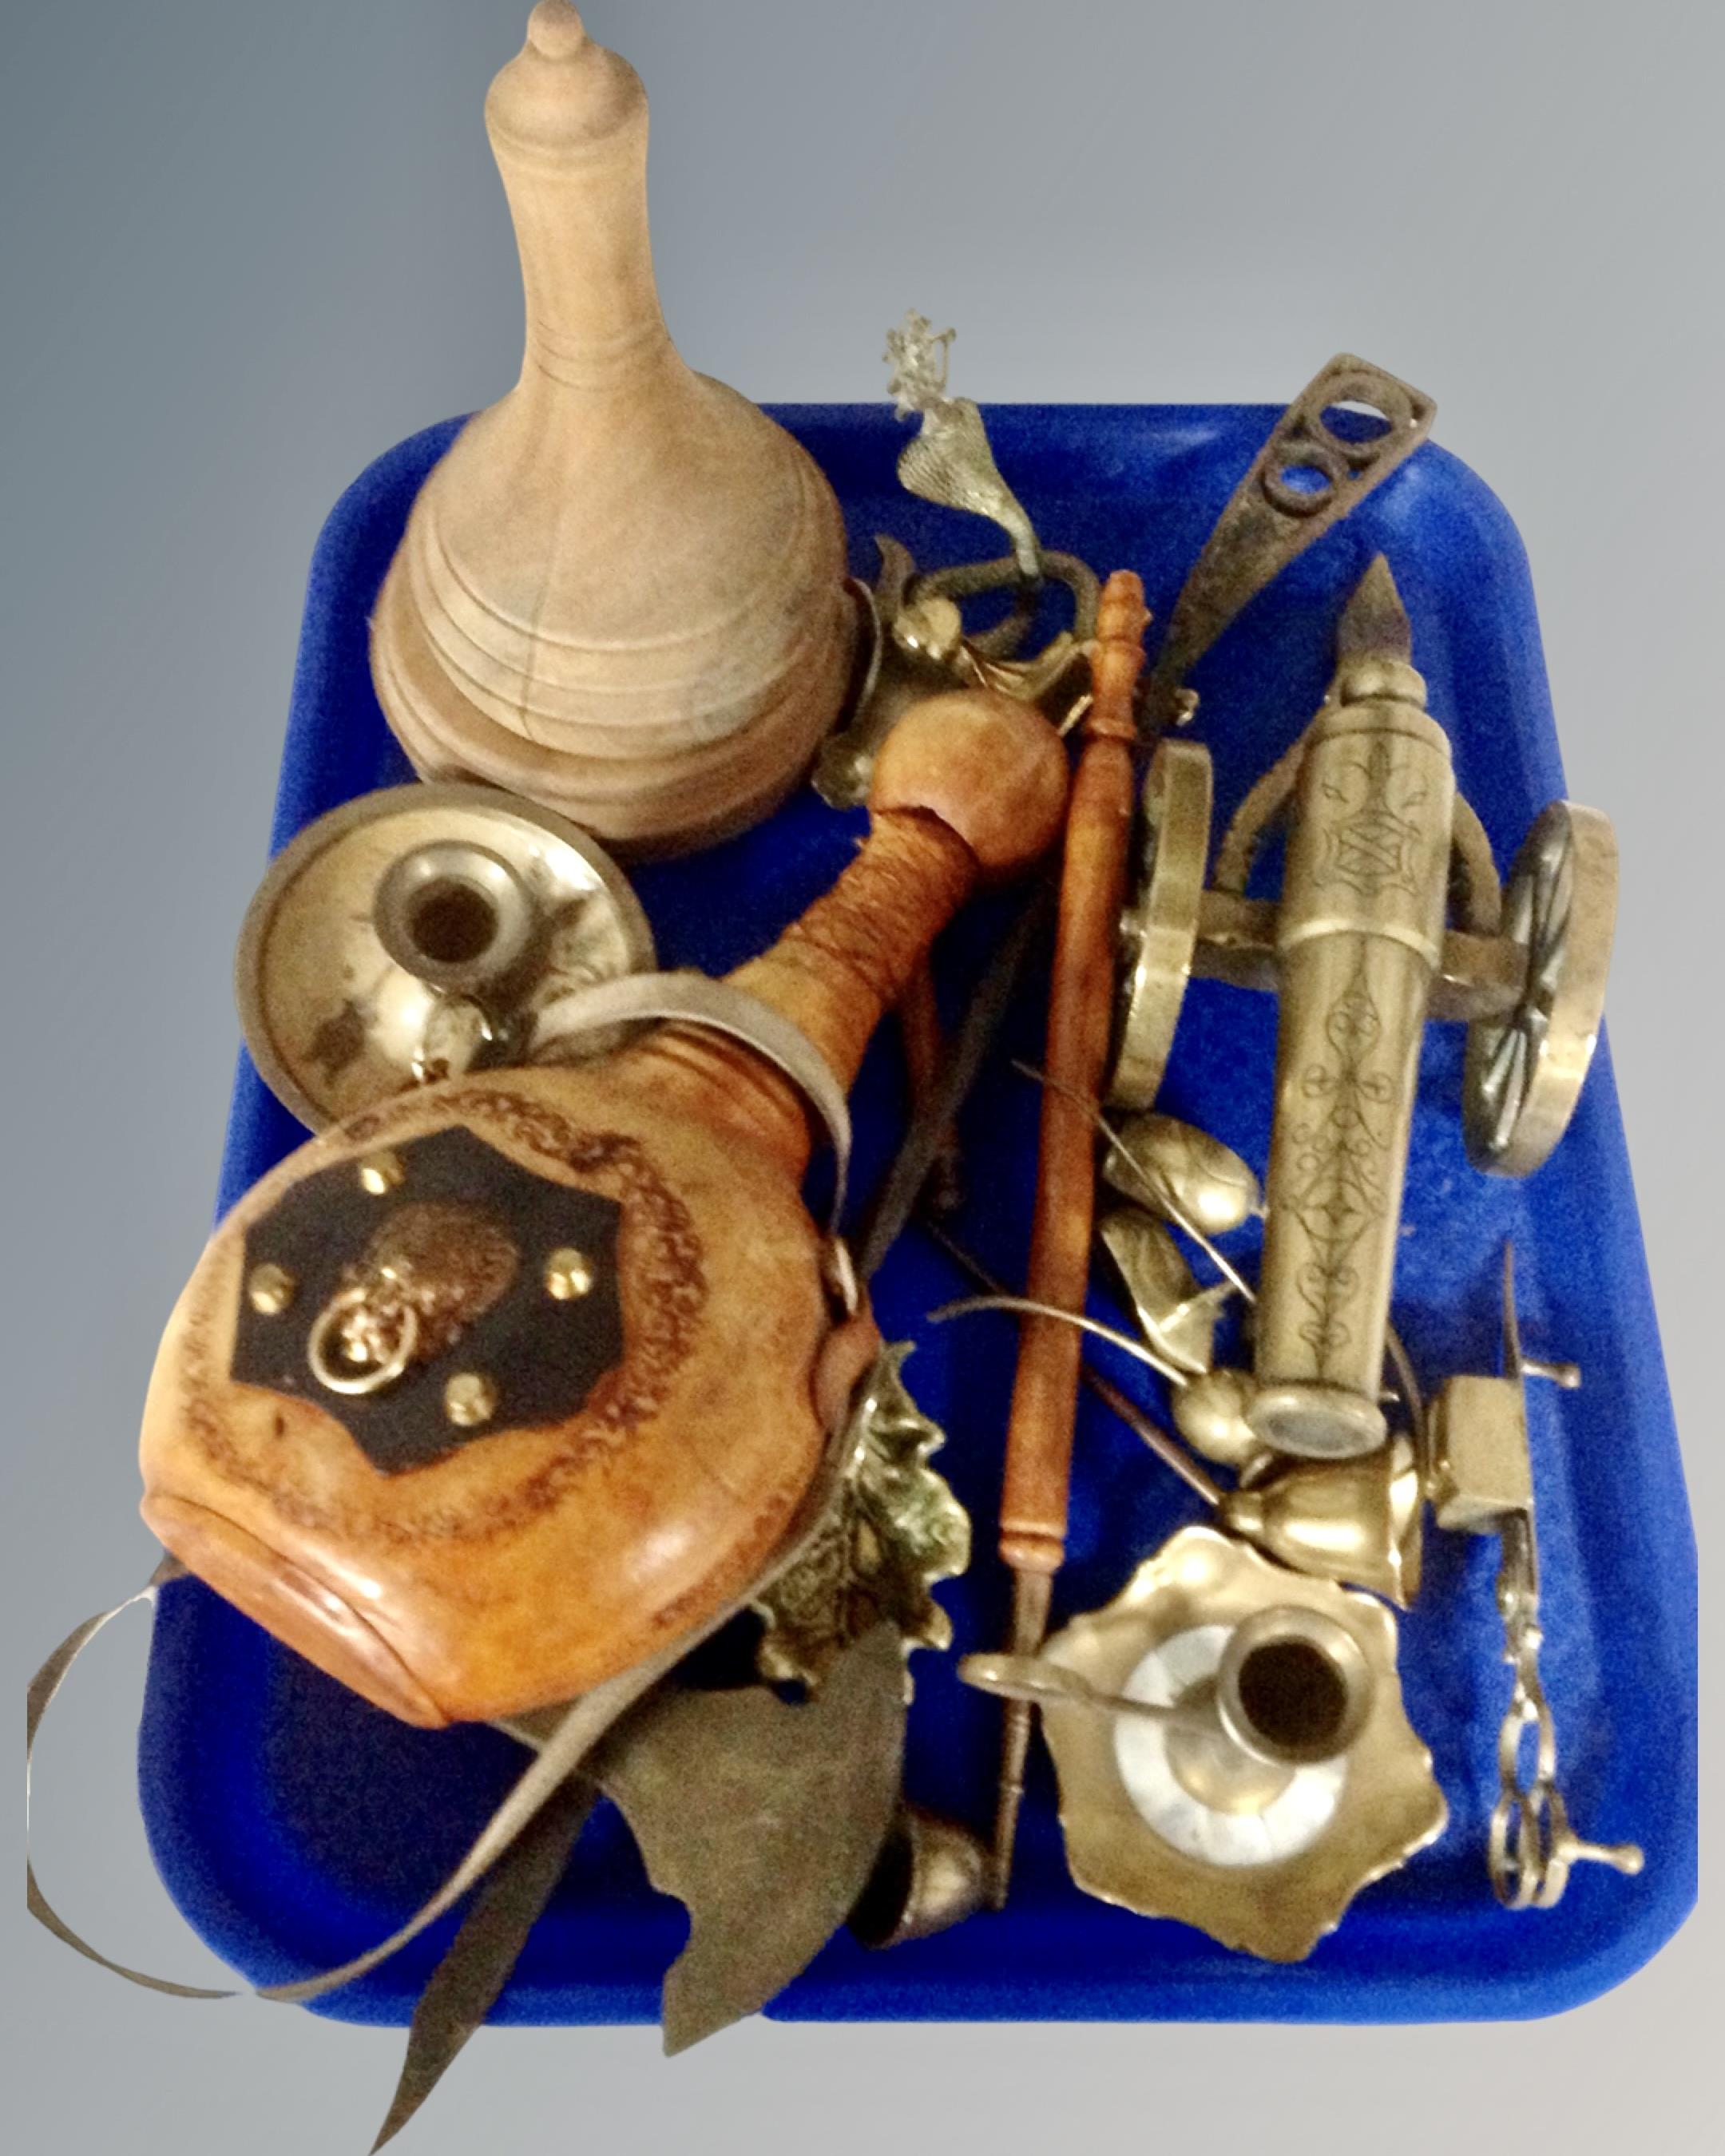 A tray containing assorted metal wares including a brass cannon, ornaments, candlesticks,